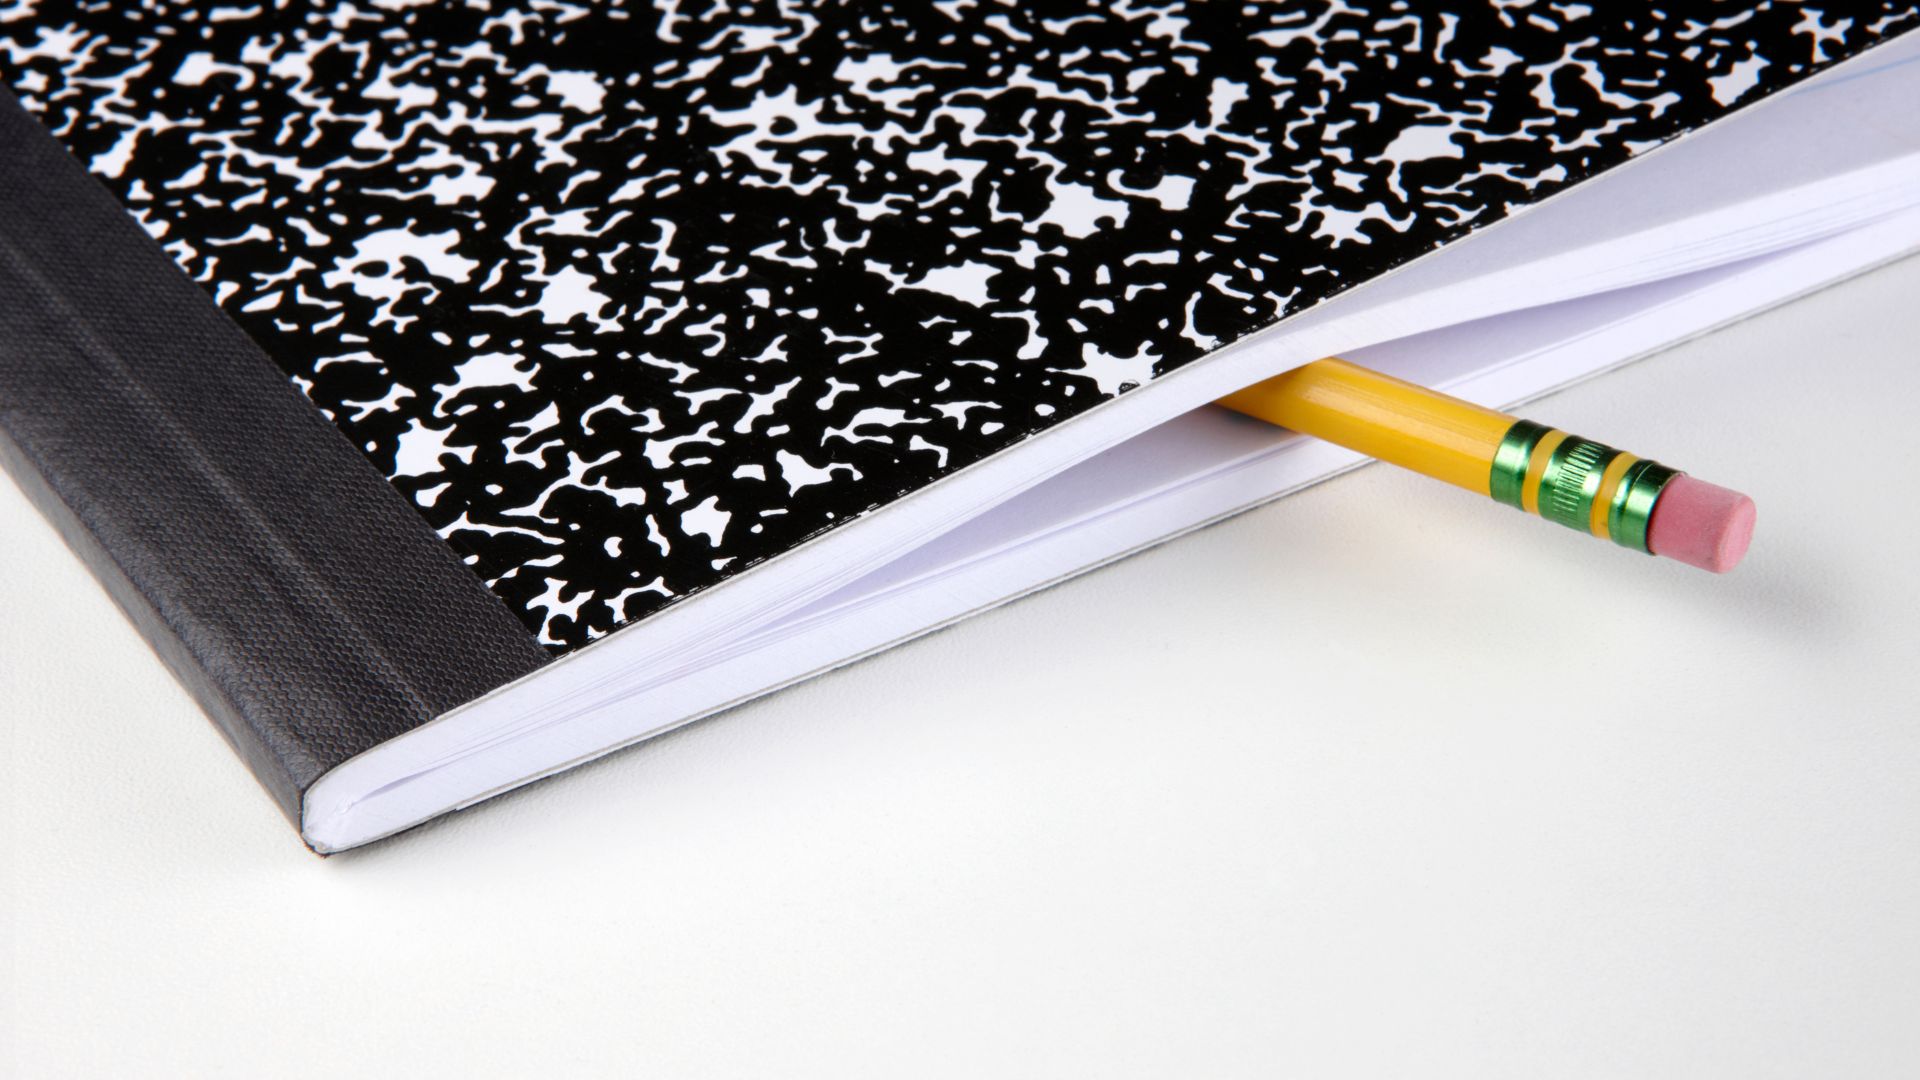 8 Ways to Get More Out of Your Composition Notebooks